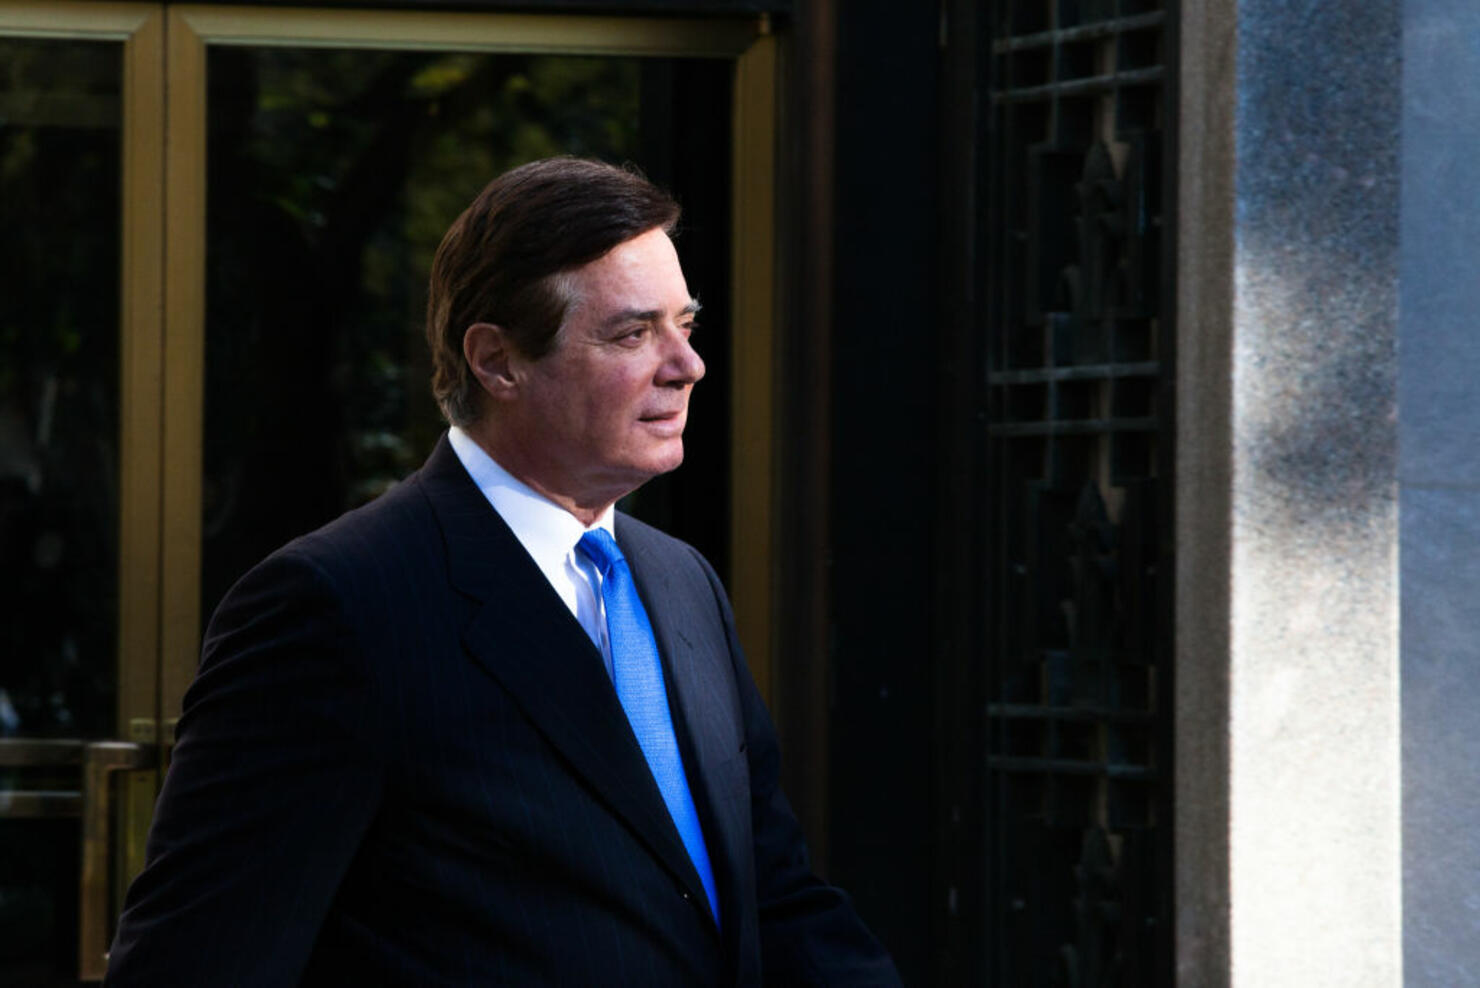 Paul Manafort pleads guilty in deal with special counsel